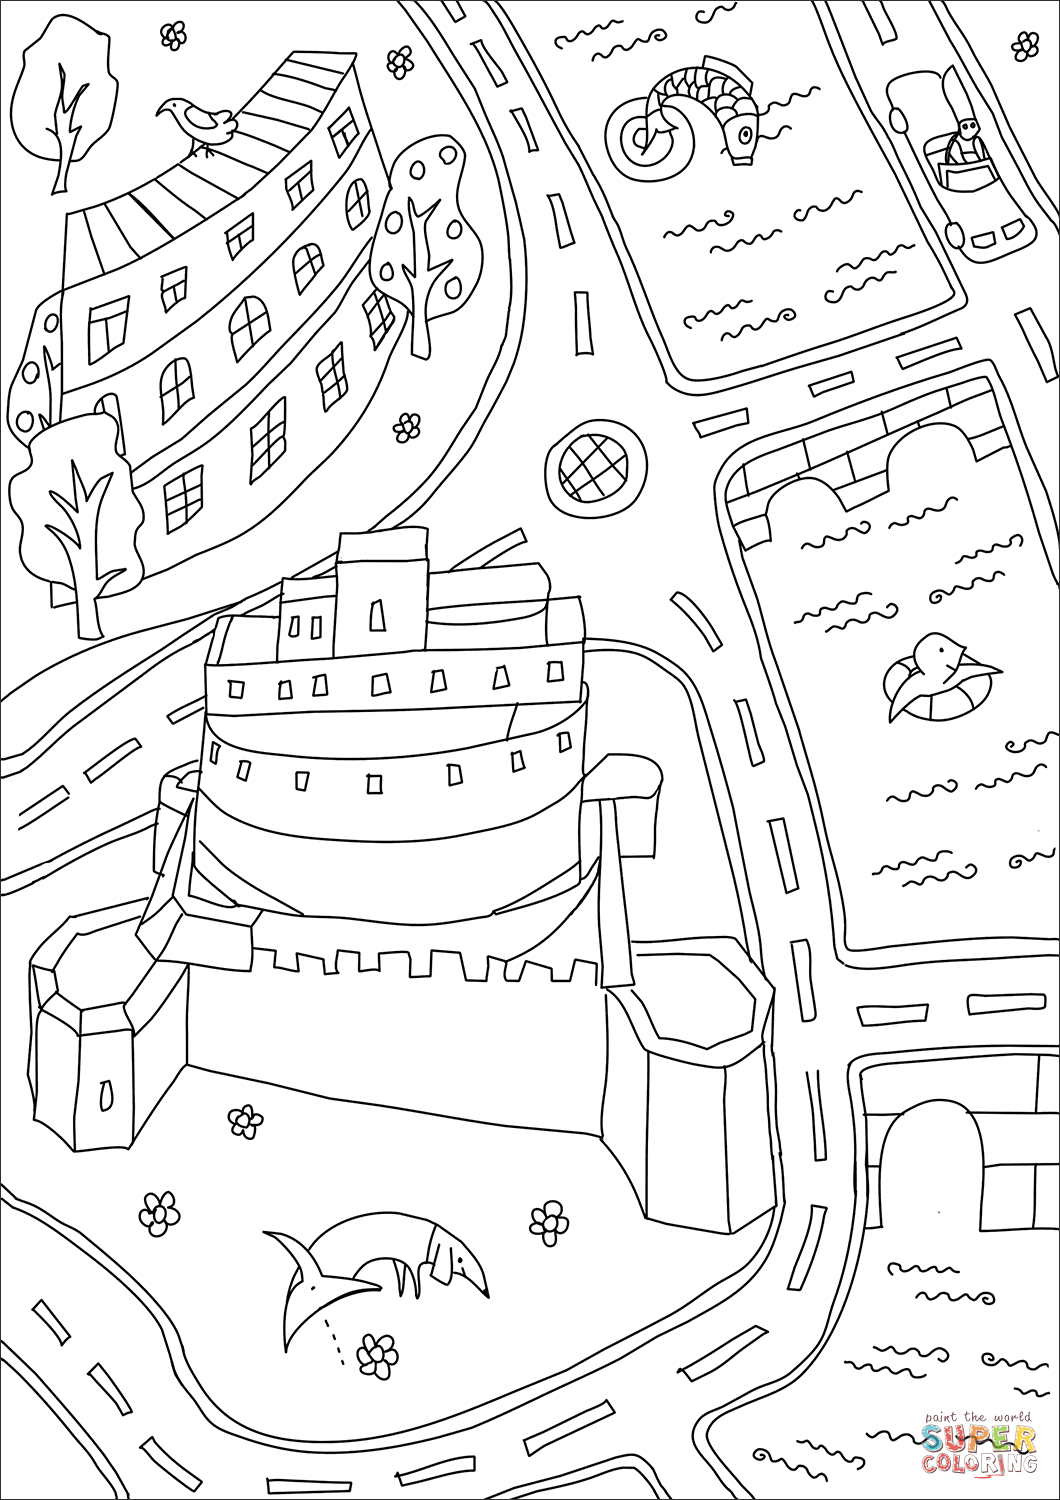 Castel Sant'Angelo coloring page | Free Printable Coloring Pages